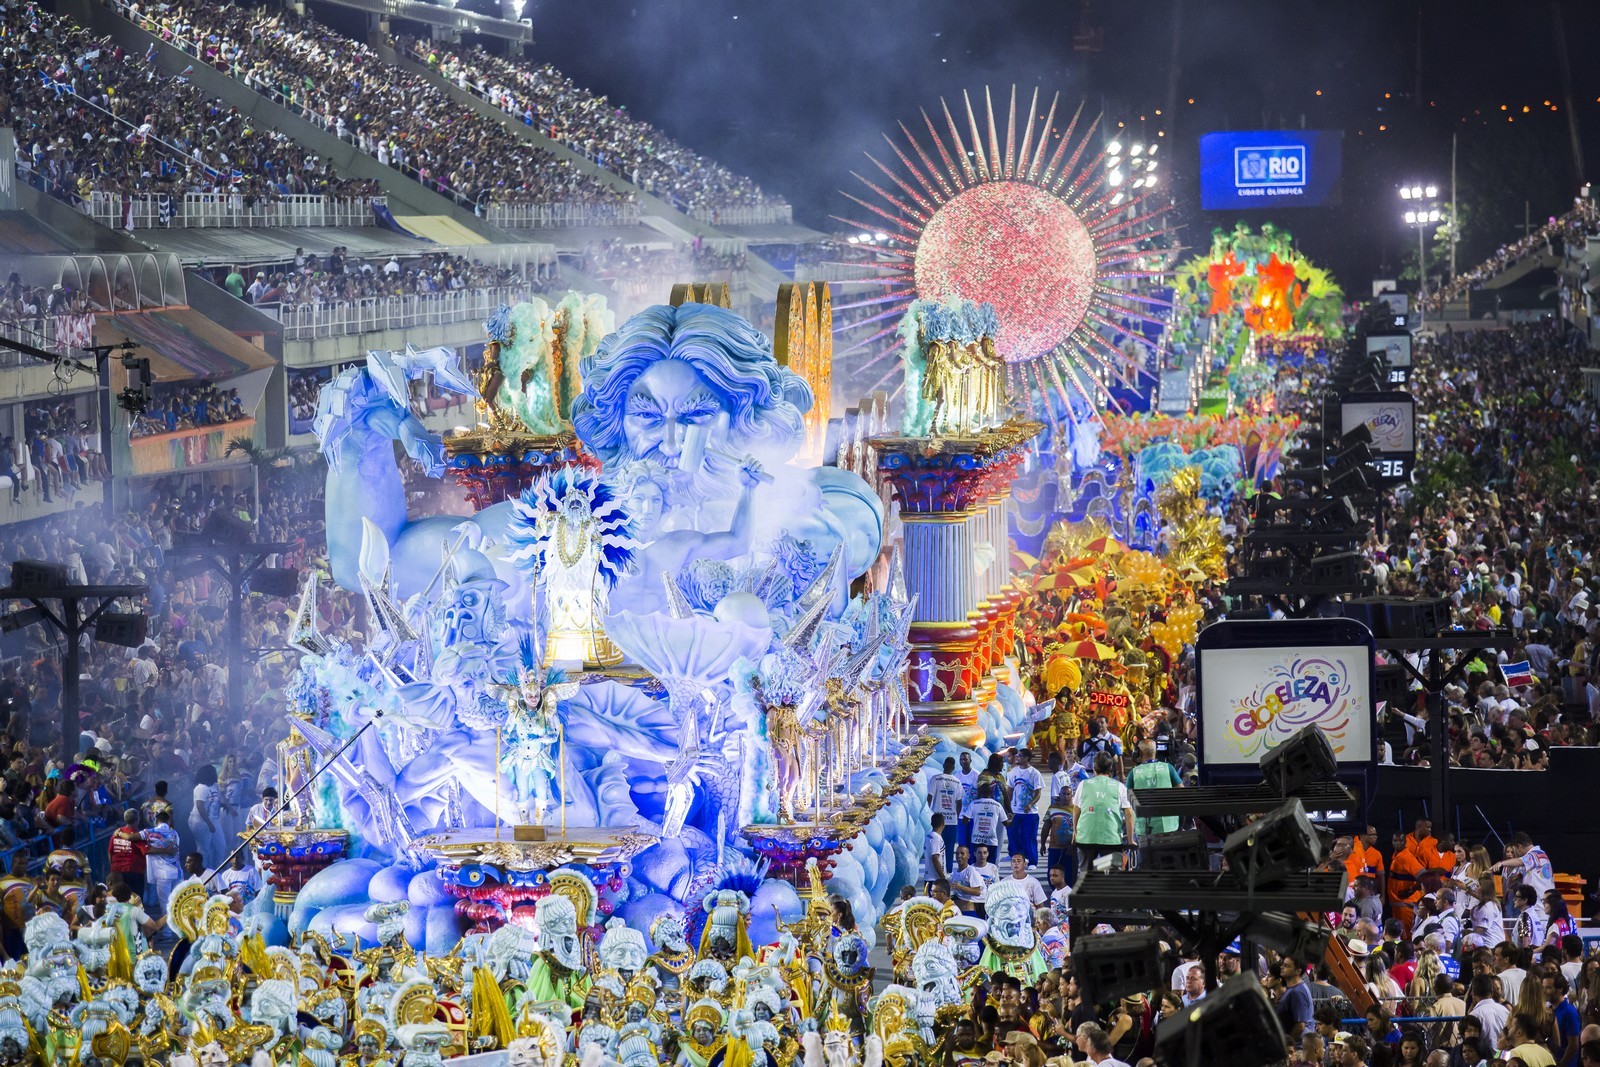 The best of Rio's Carnival are the parades!